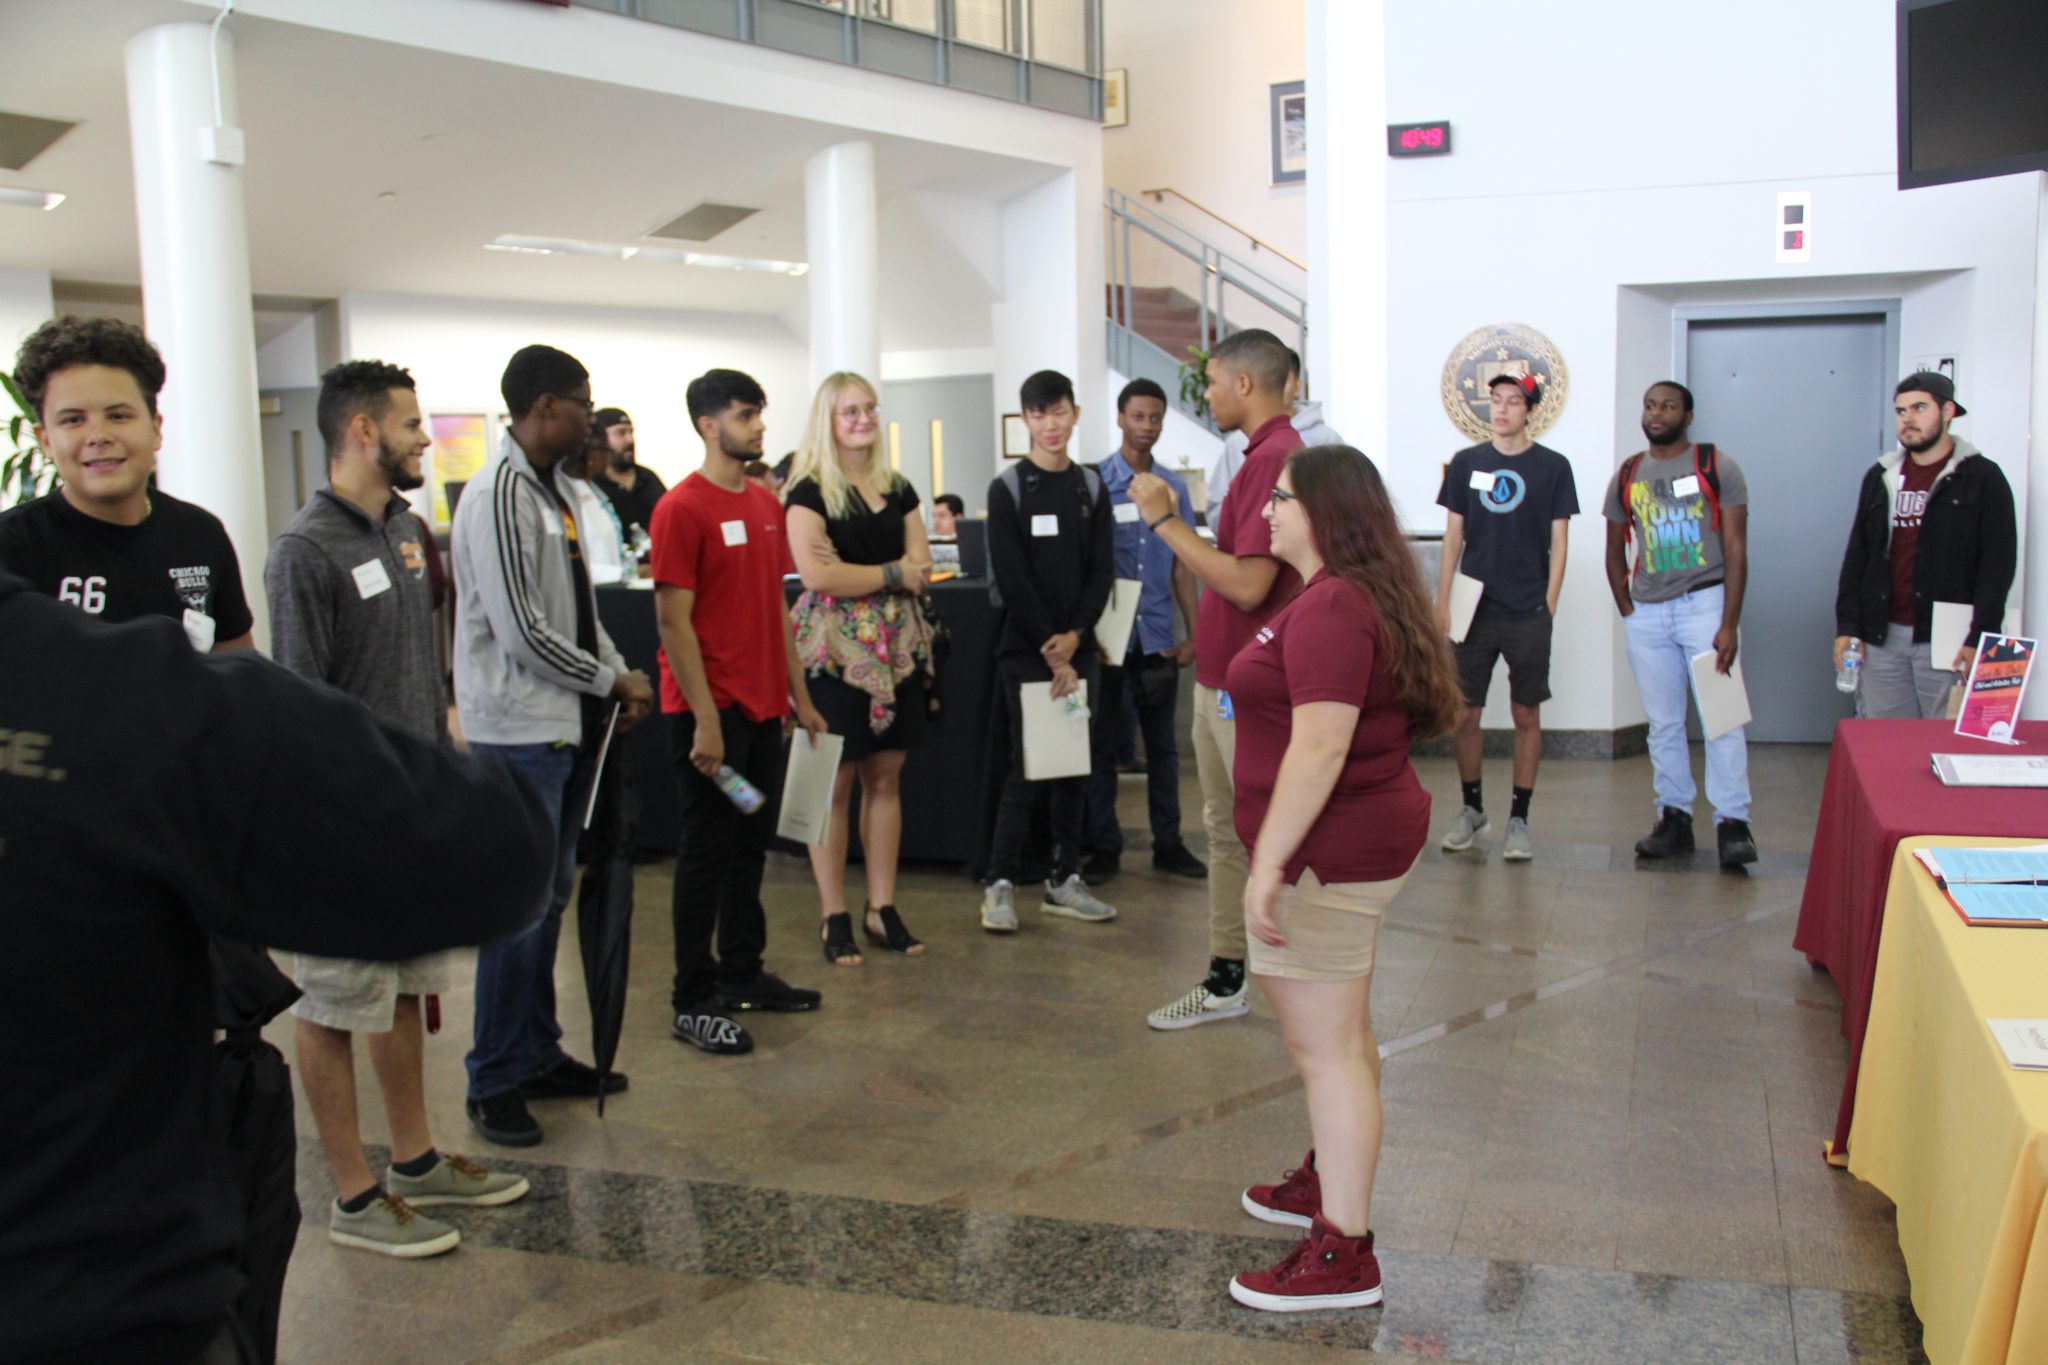 Vaughn Welcomes Incoming Students with New Student Orientation